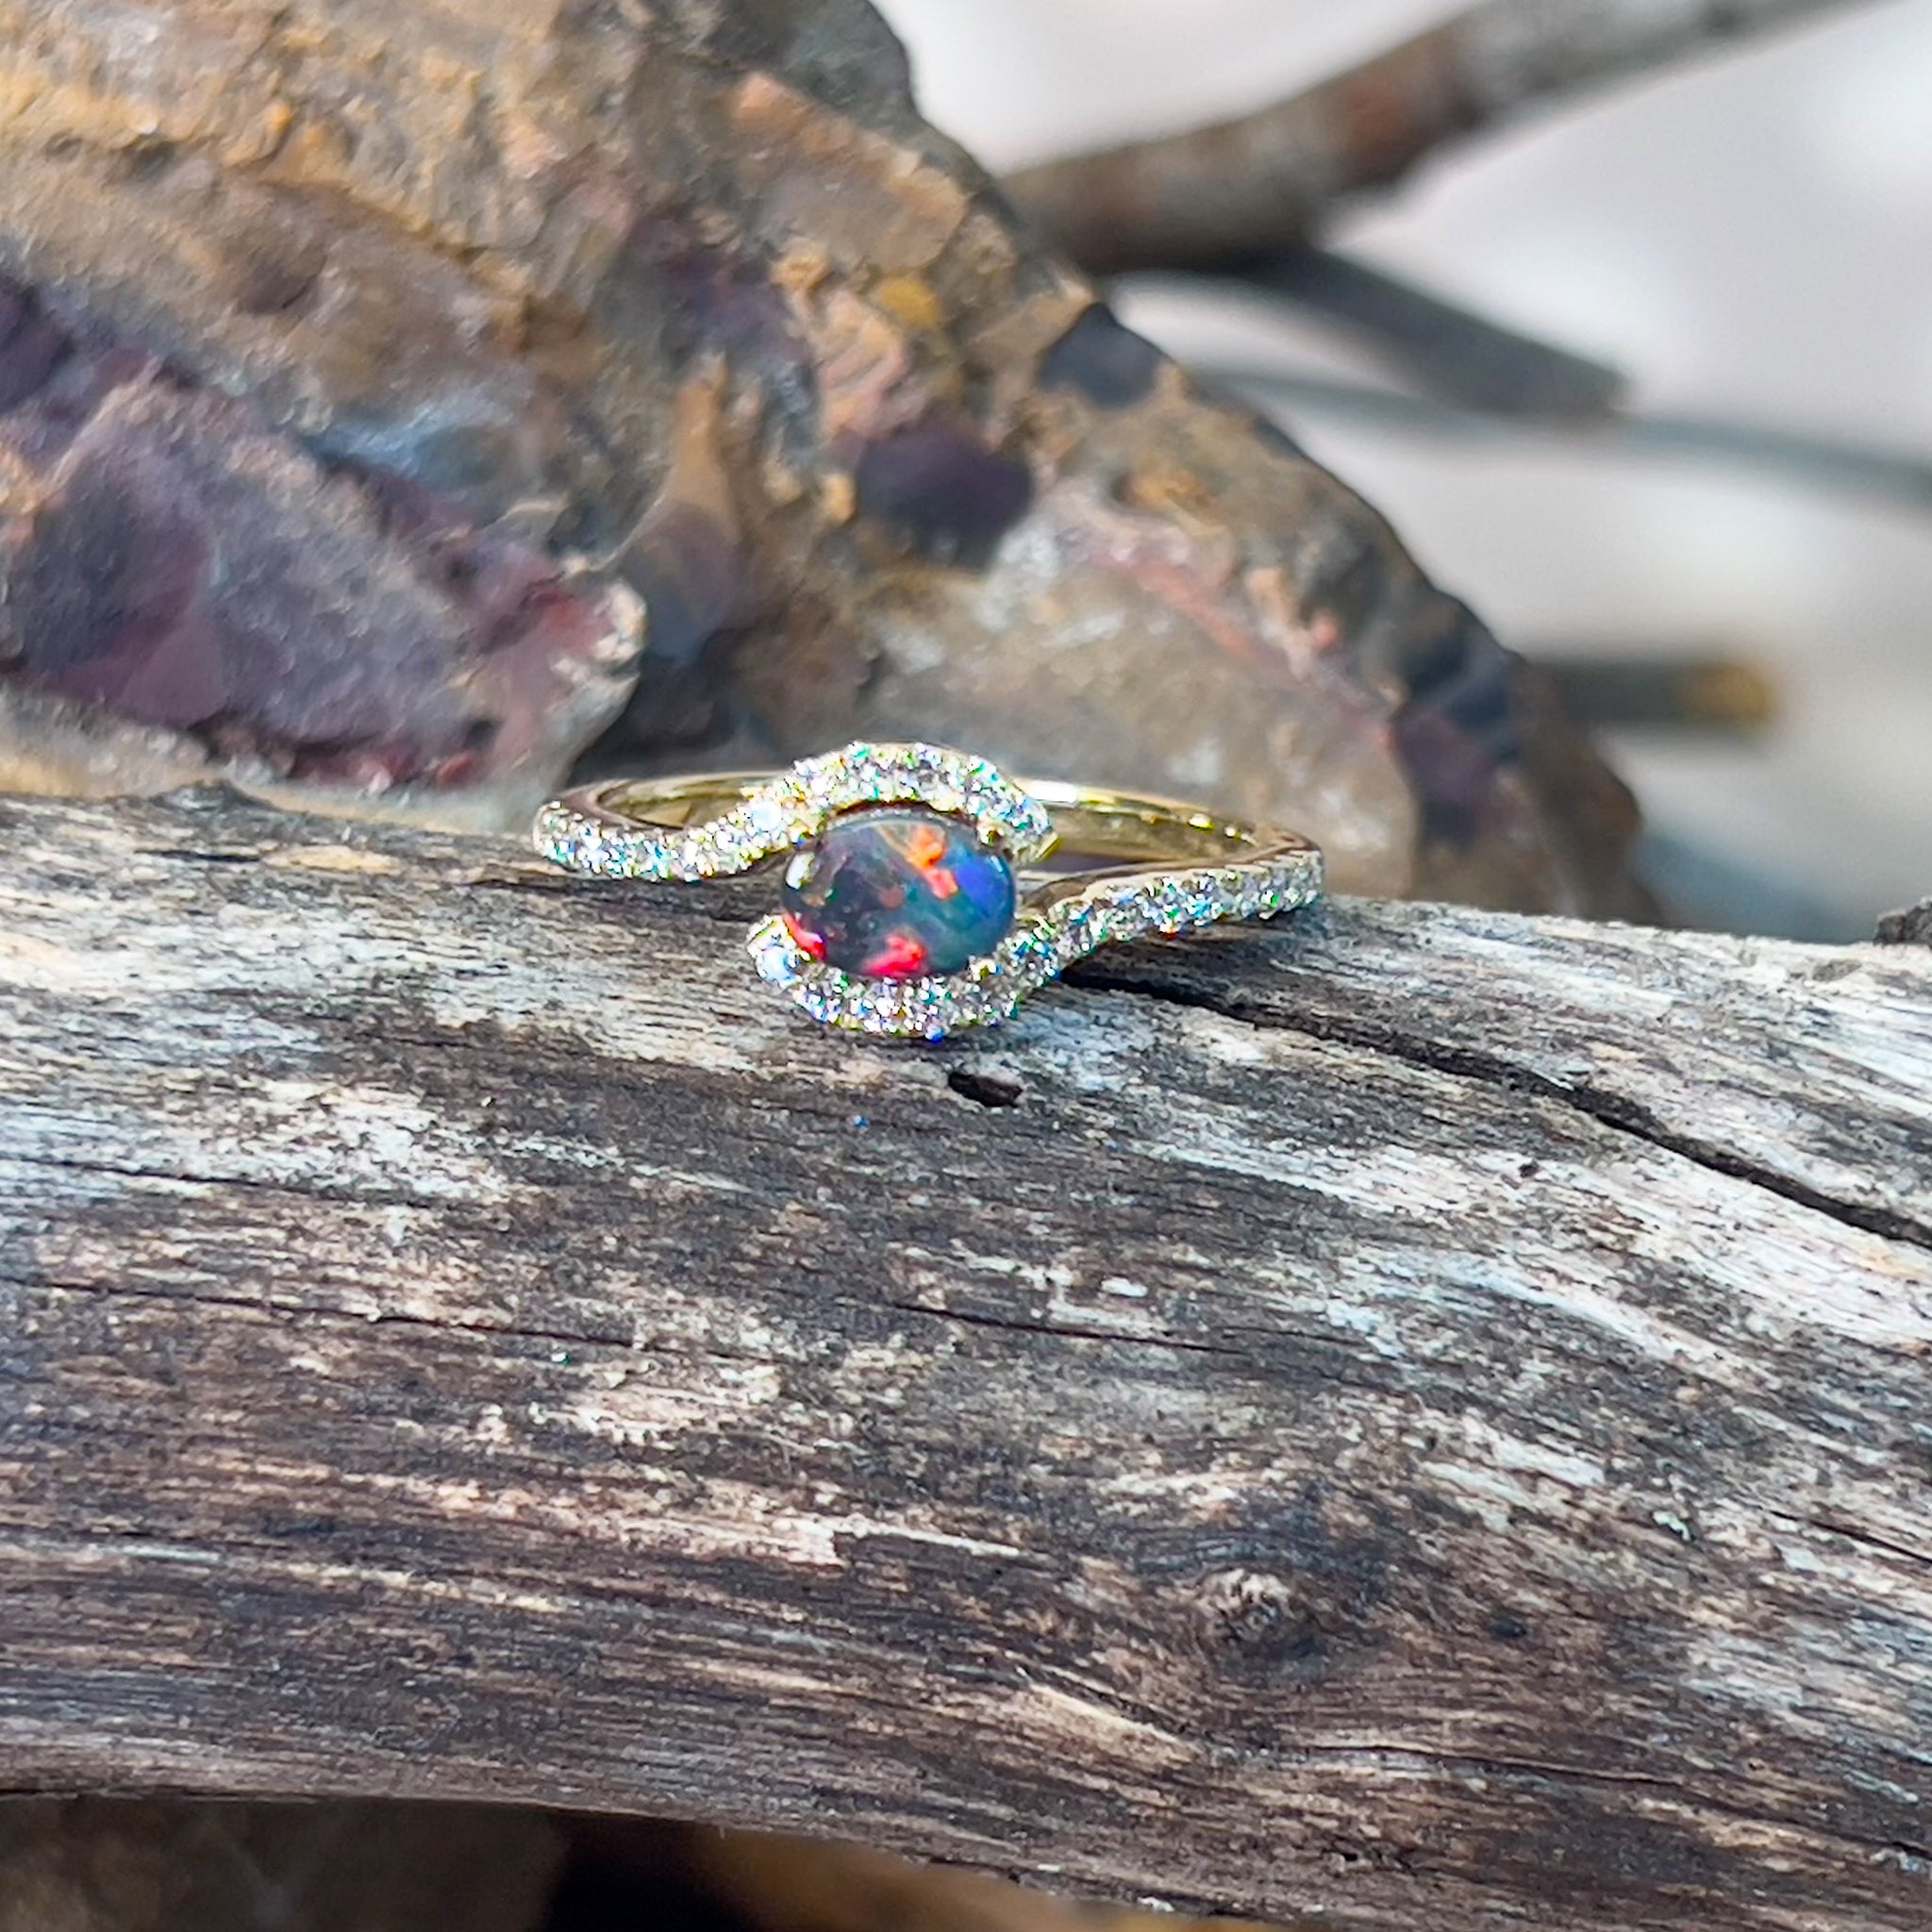 Buy Australian Fire Opal Ring in 925 Sterling Silver Ring, Recycled Eco  Round Opal Jewelry, Geometric Architectural Solitaire Statement Ring Online  in India - Etsy